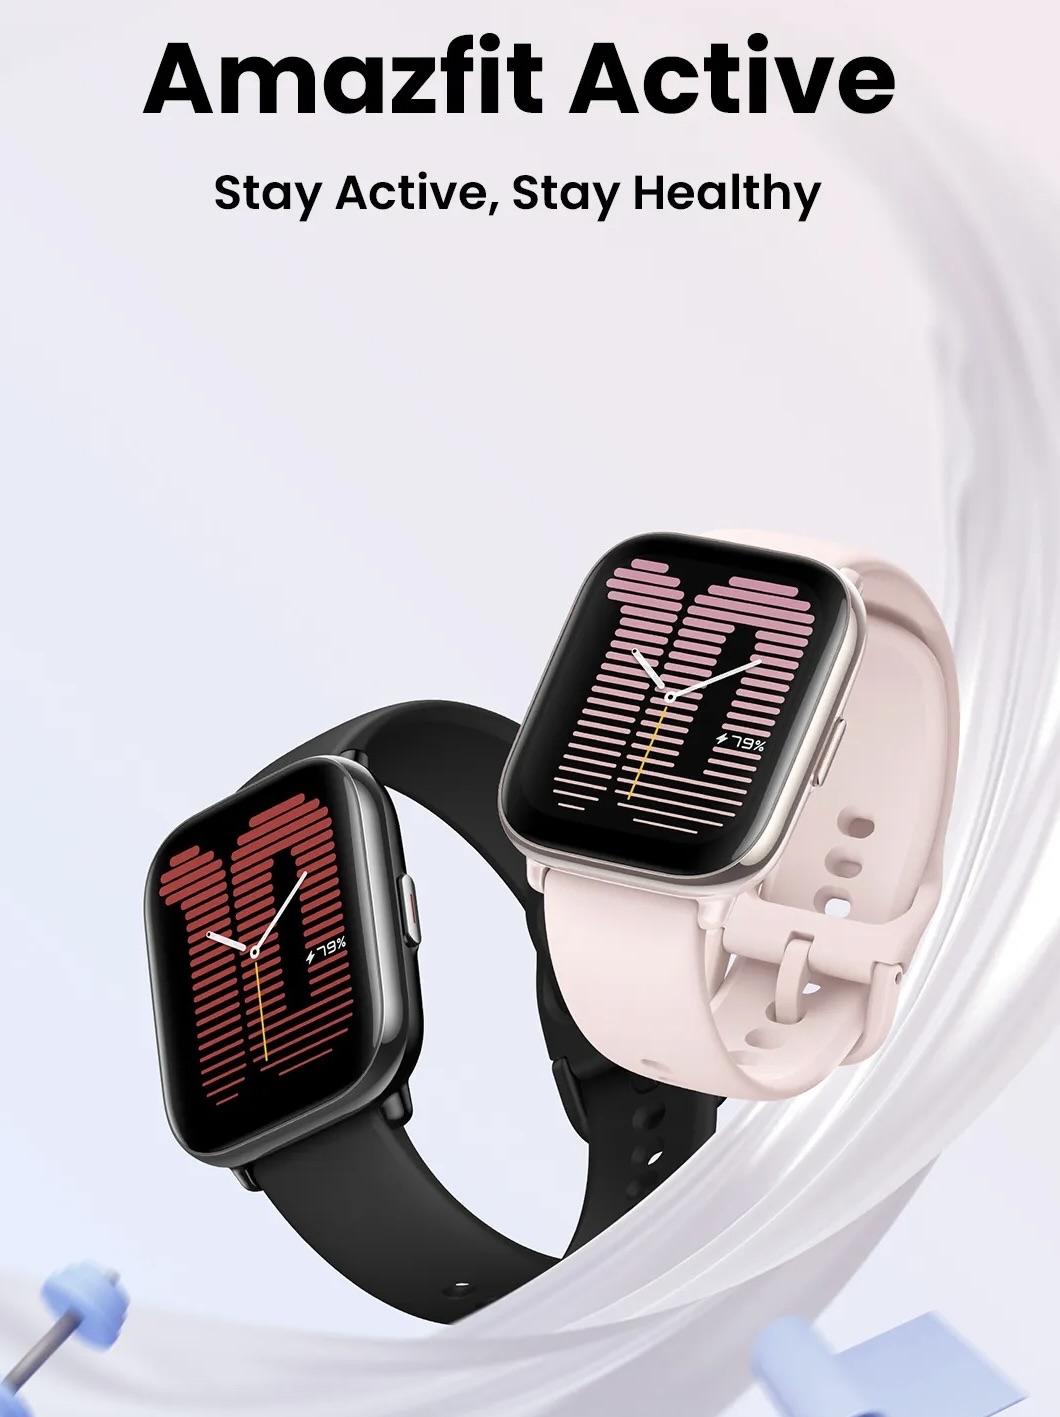 Amazfit Active release - 1.75-inch AMOLED, GPS and 14-day battery at ~RM714